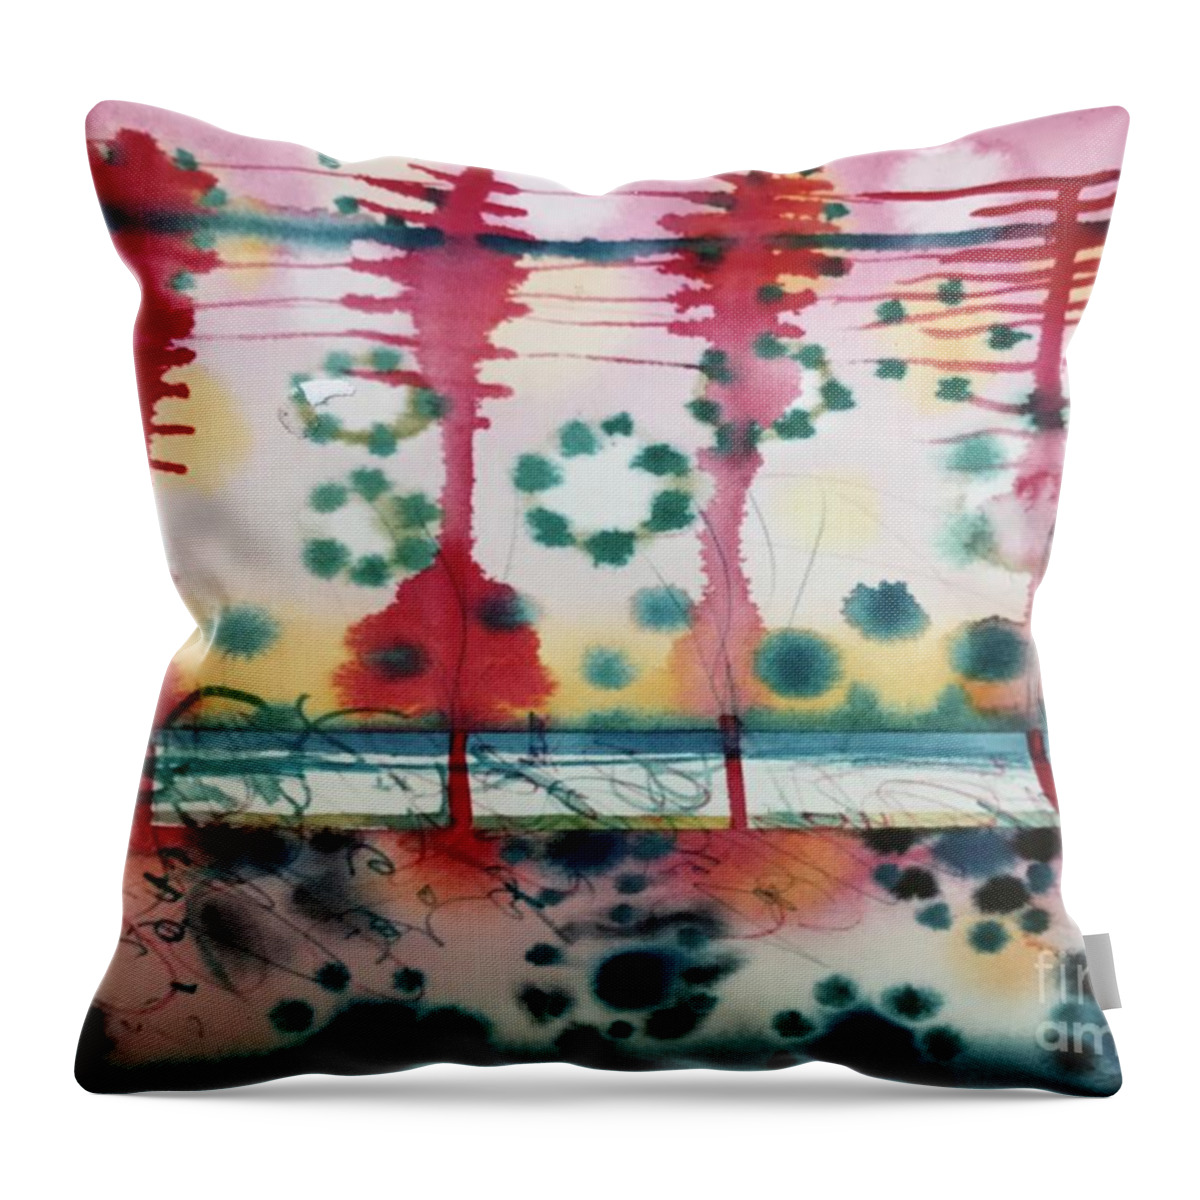 Lake Throw Pillow featuring the painting Lake Sky Apparitions by Glen Neff